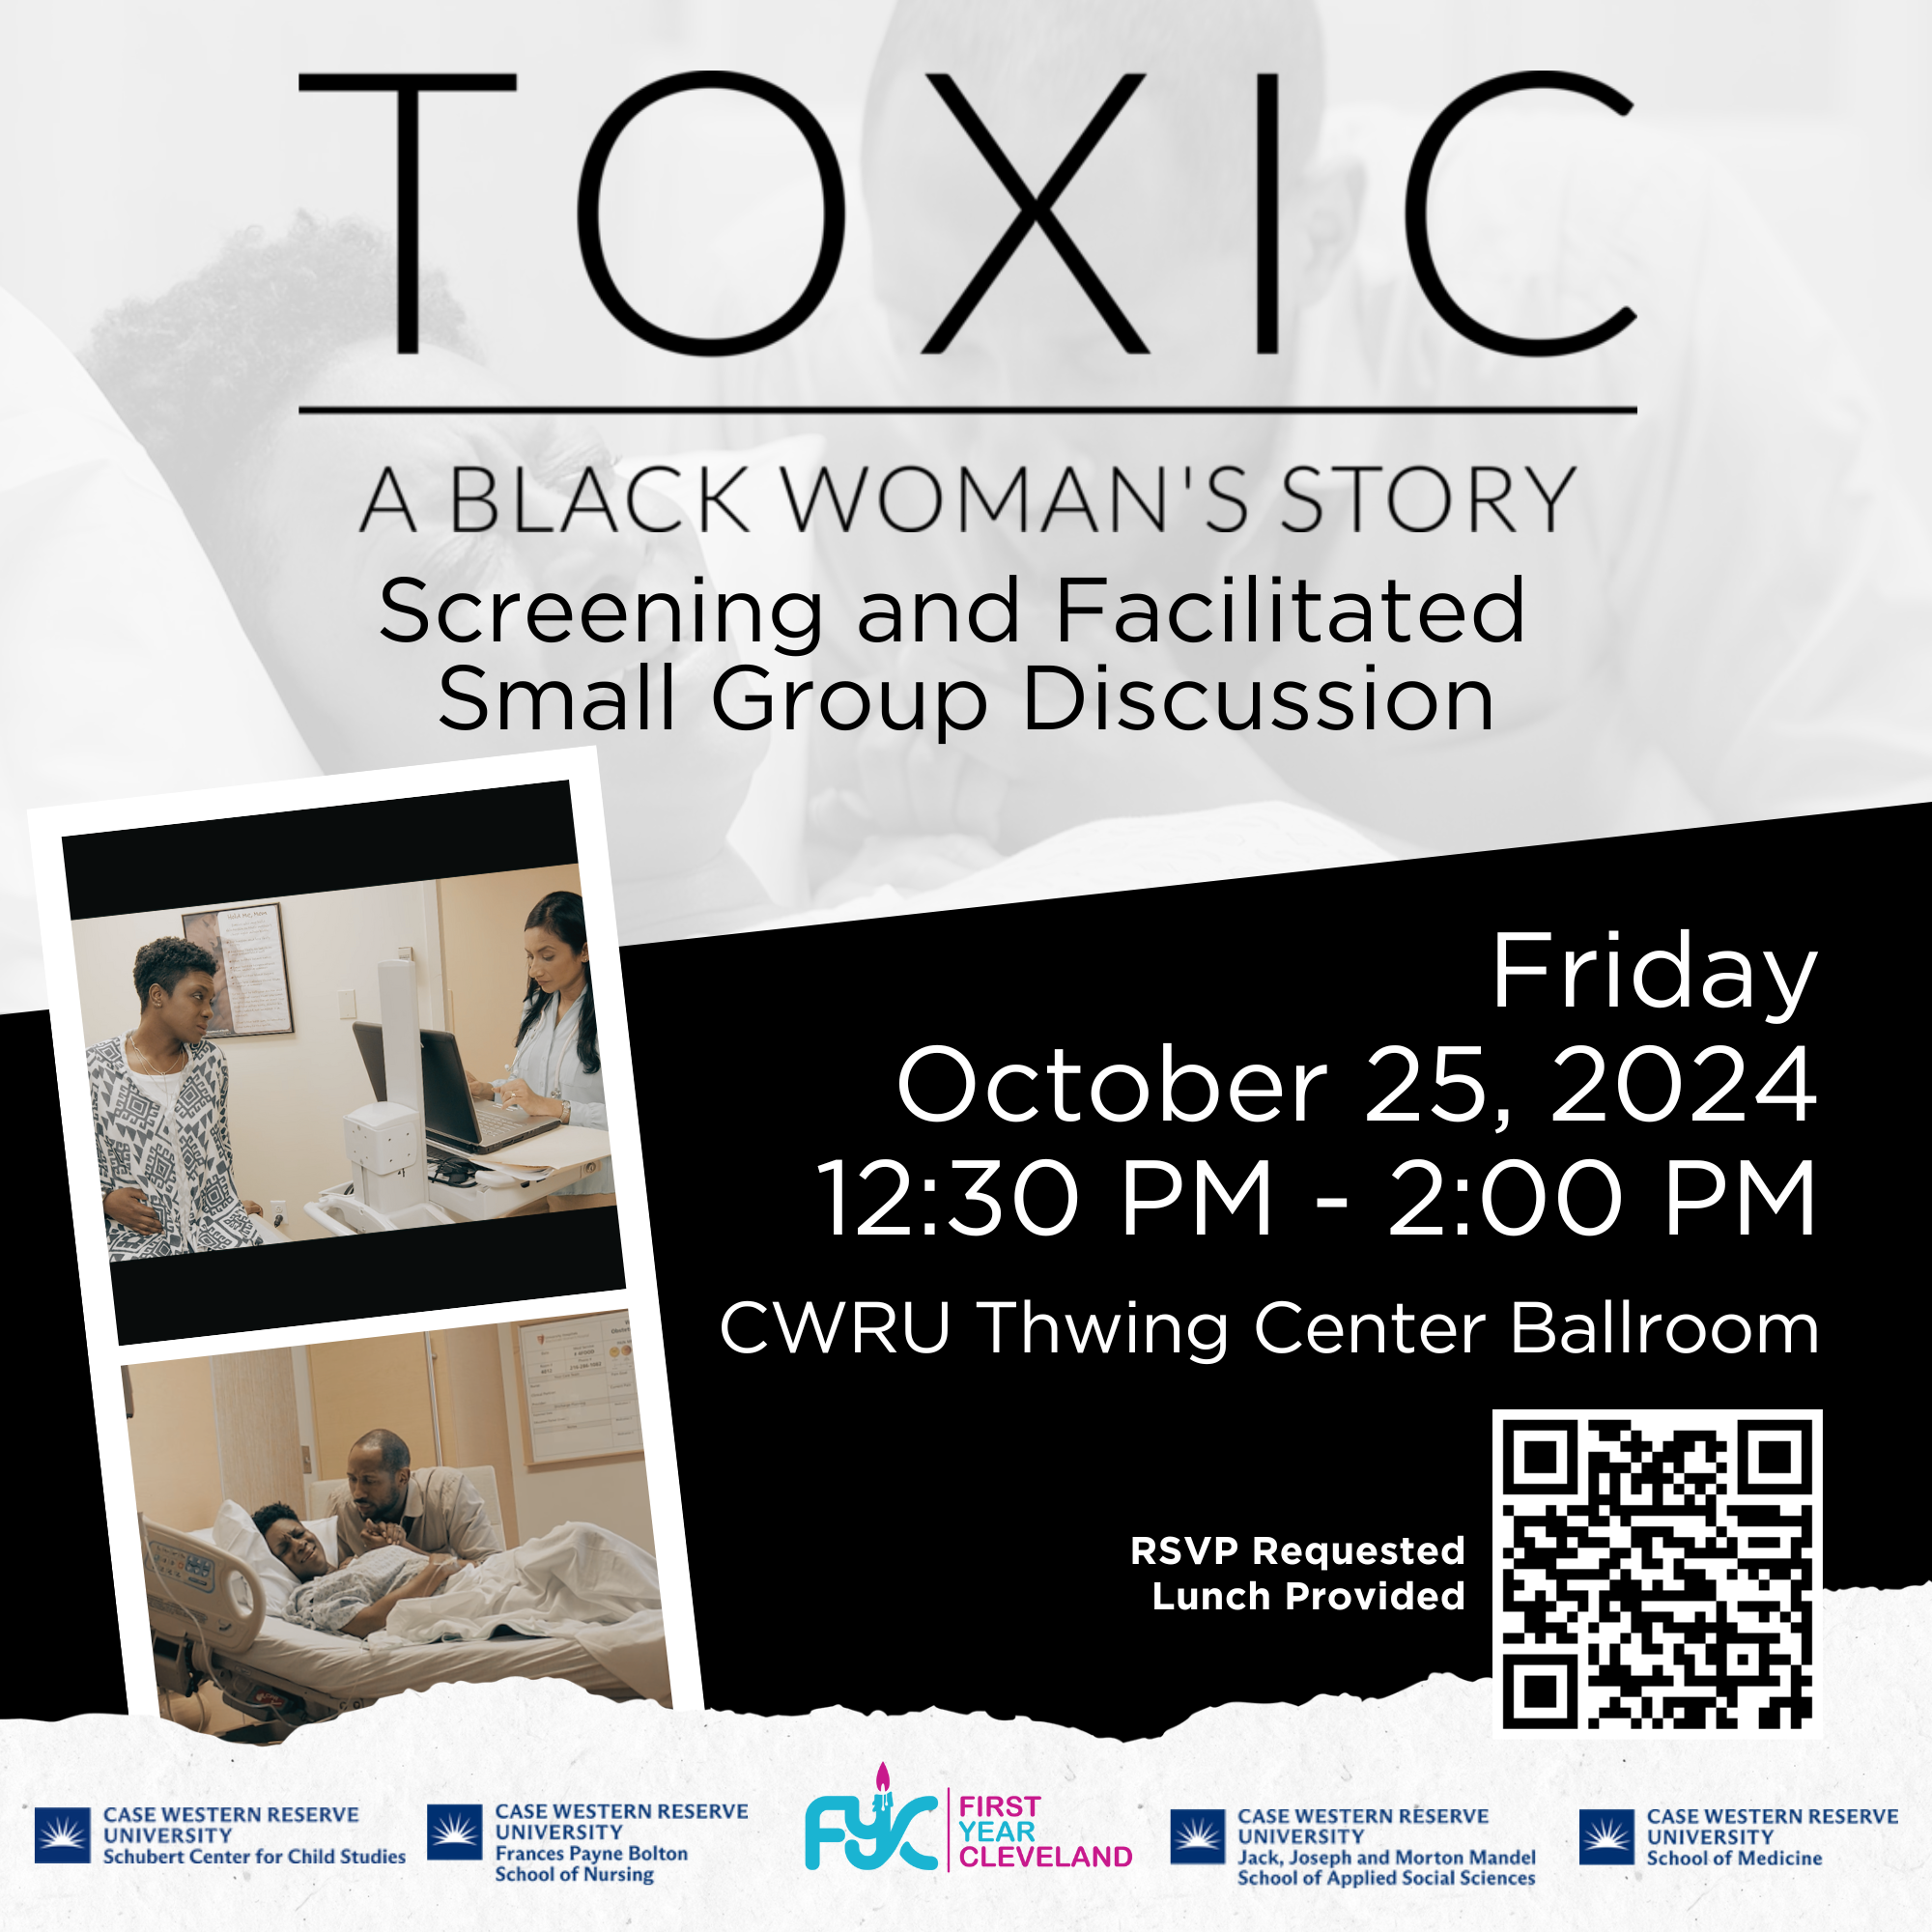 "Toxic: A Black Woman's Story Film Screening + Facilitated Lunch Discussion" with event details and images from film